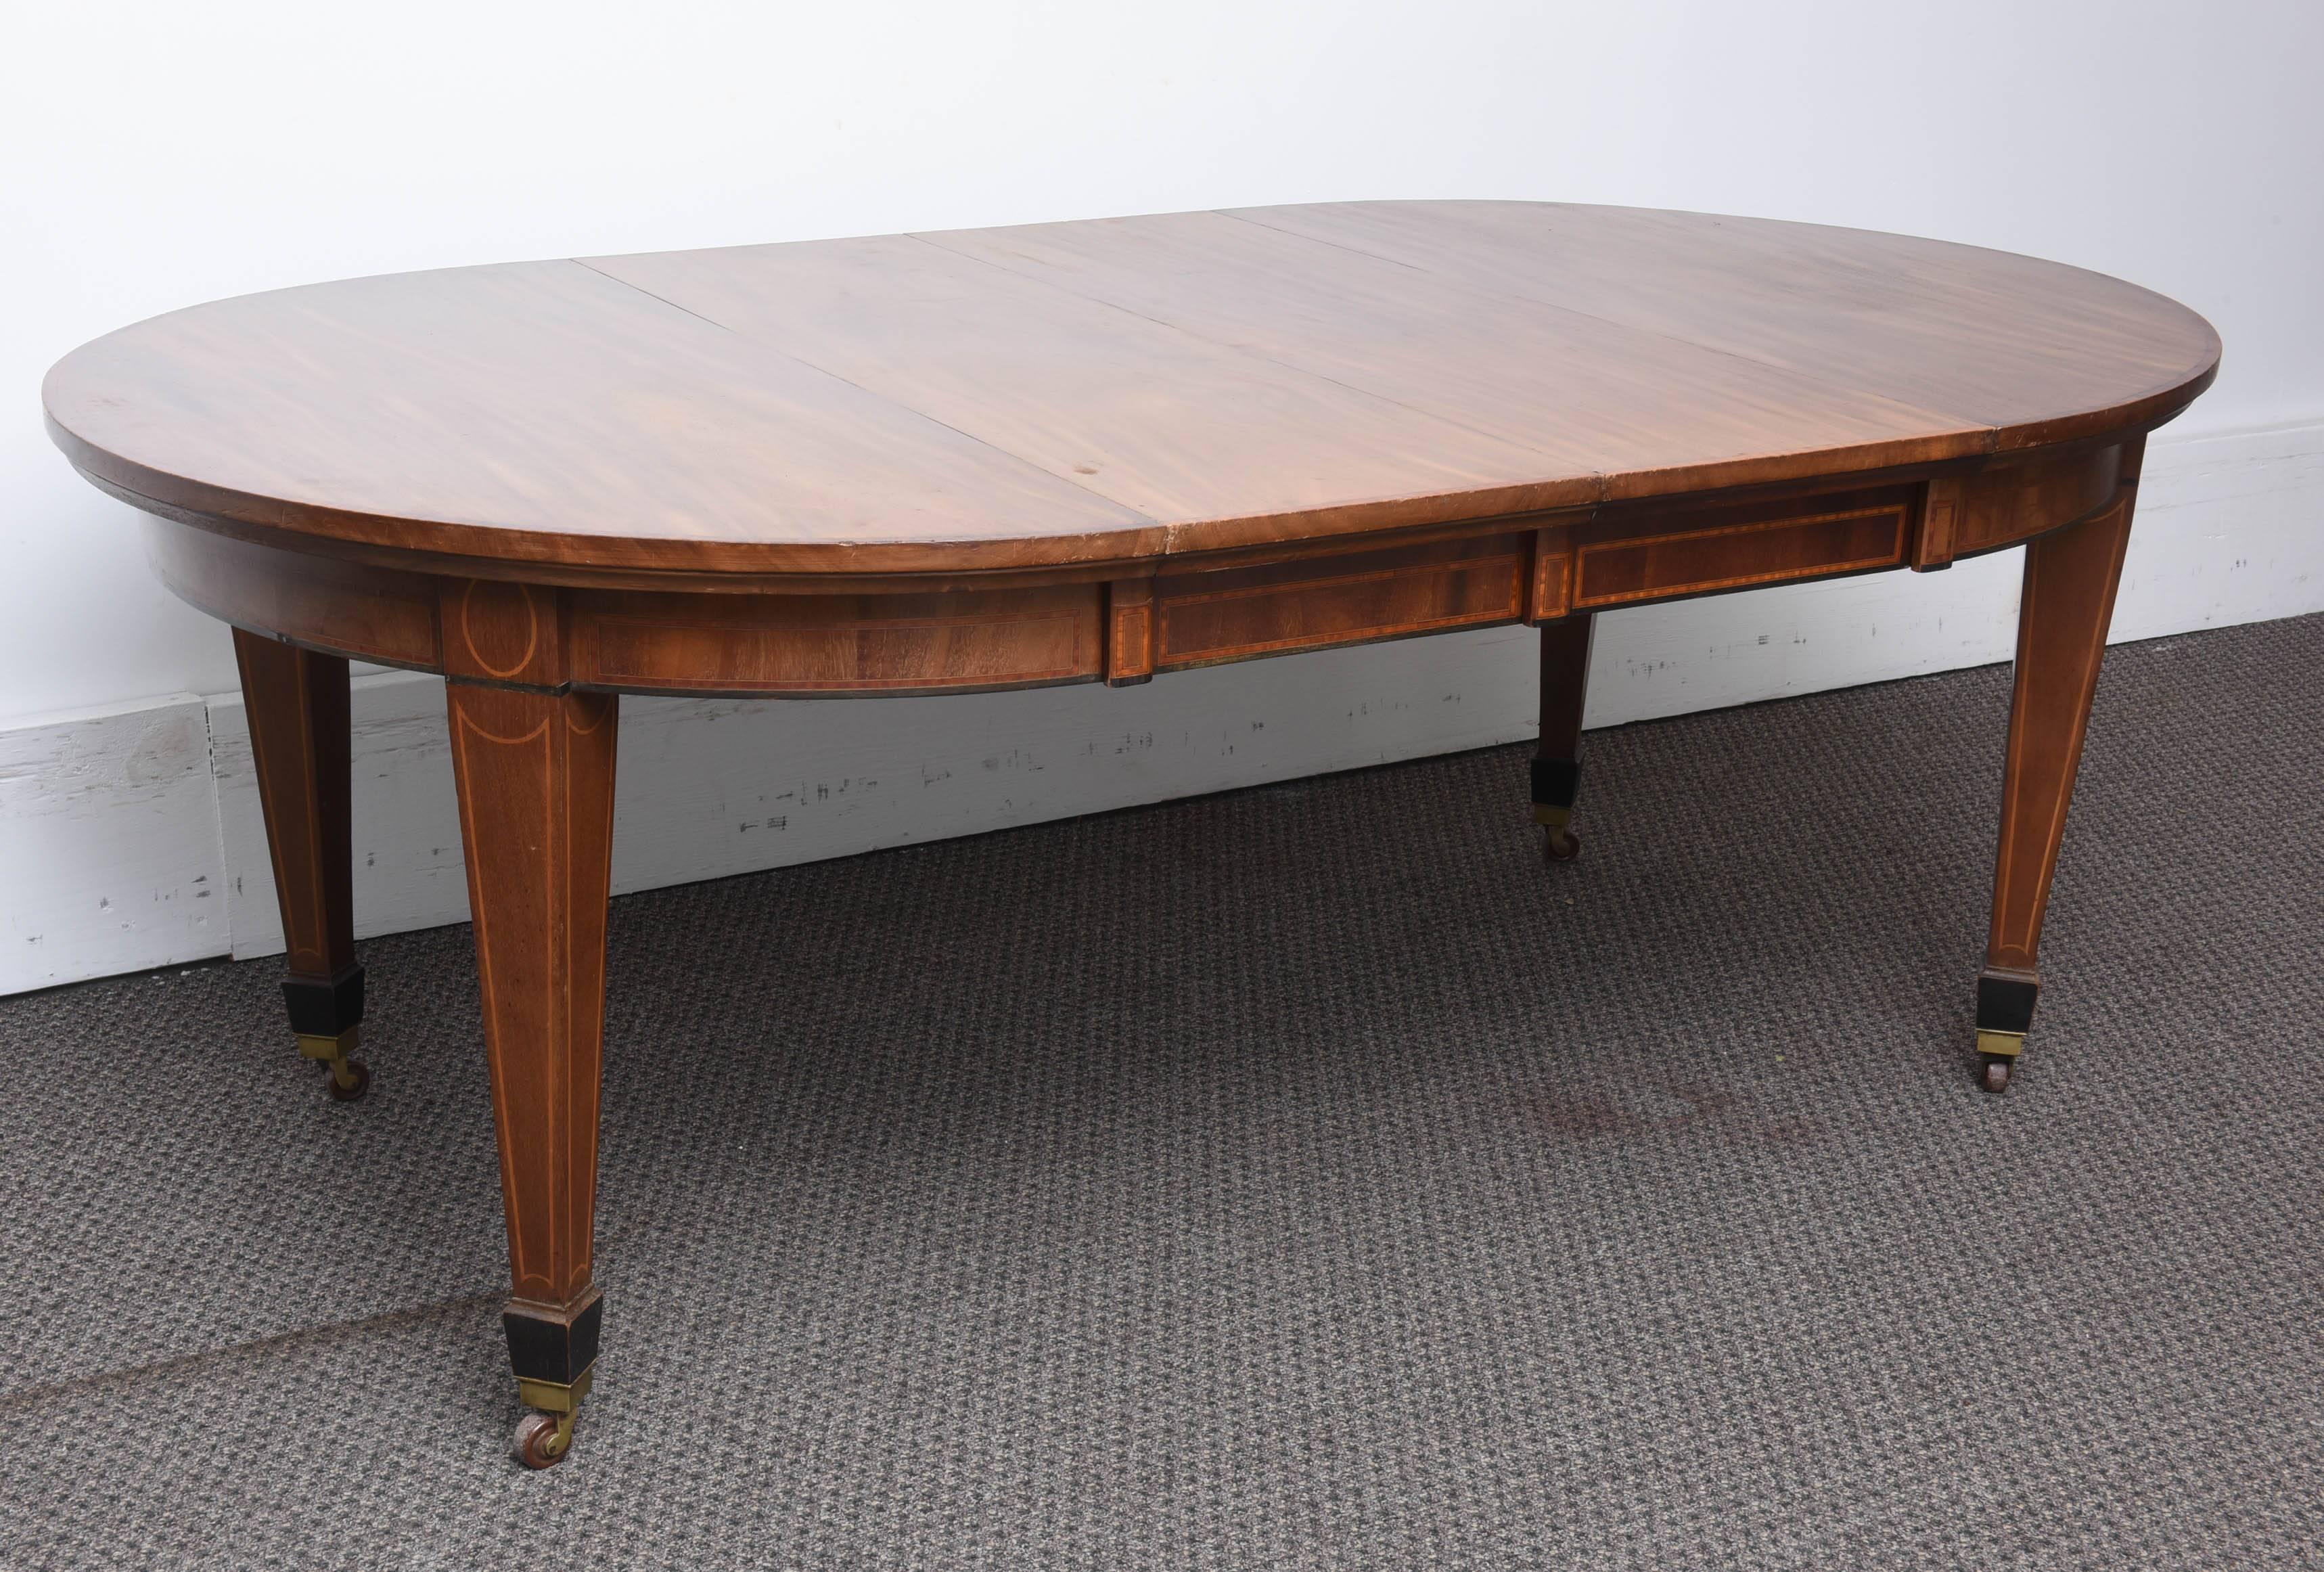 Superb 19th C.Edwardian English Solid Mahogany Round Dining Table with Two Leaf 5